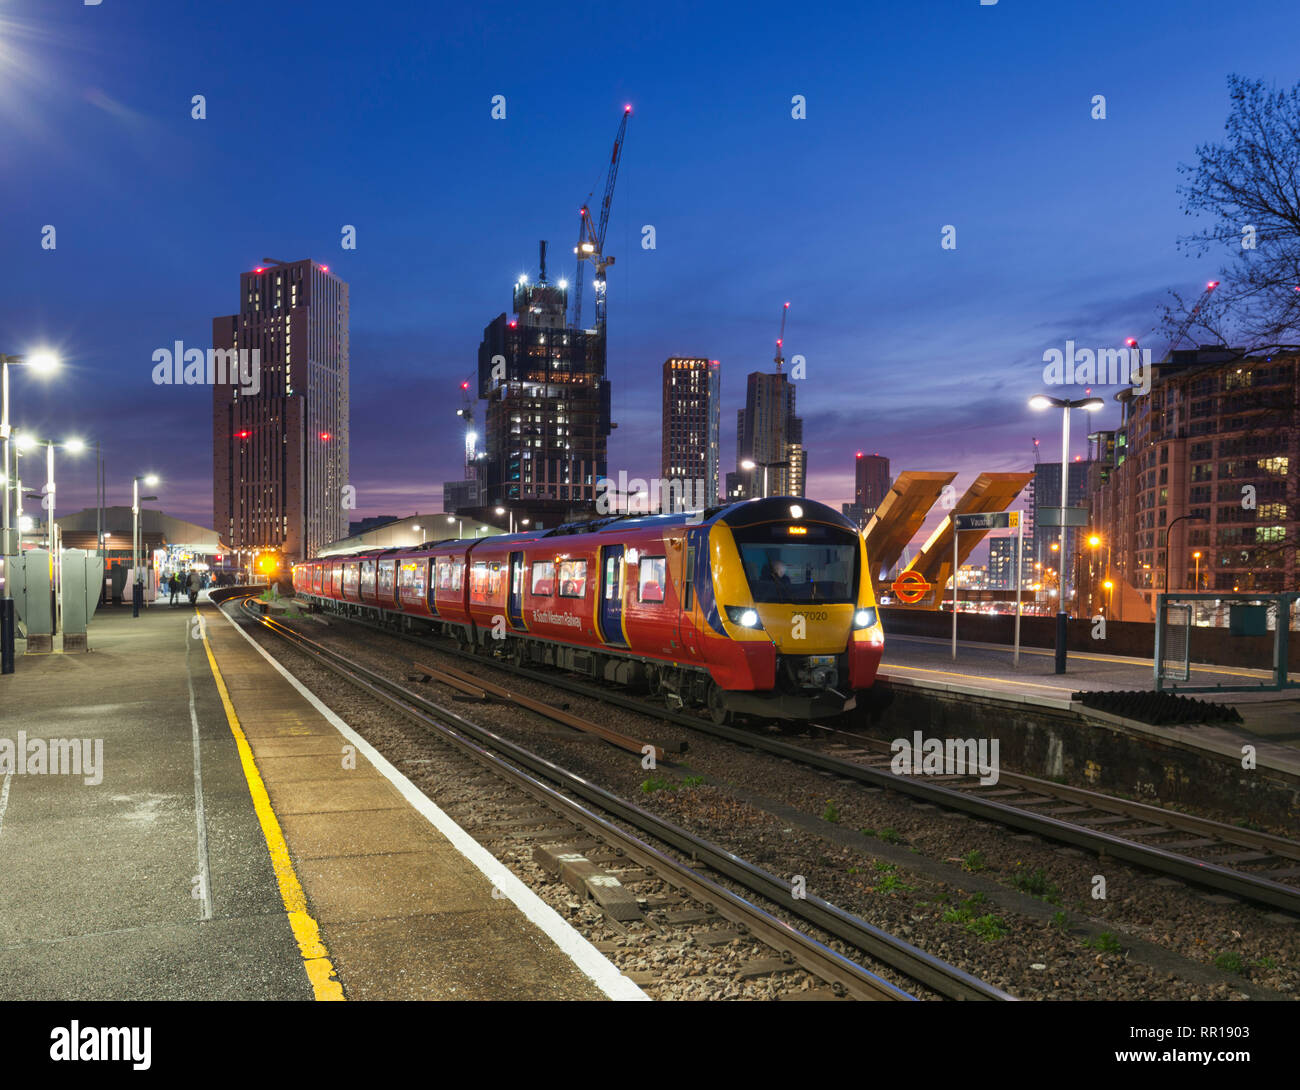 A South Western railway class 707 calling at  Vauxhall, London at dusk with the London skyline behind Stock Photo